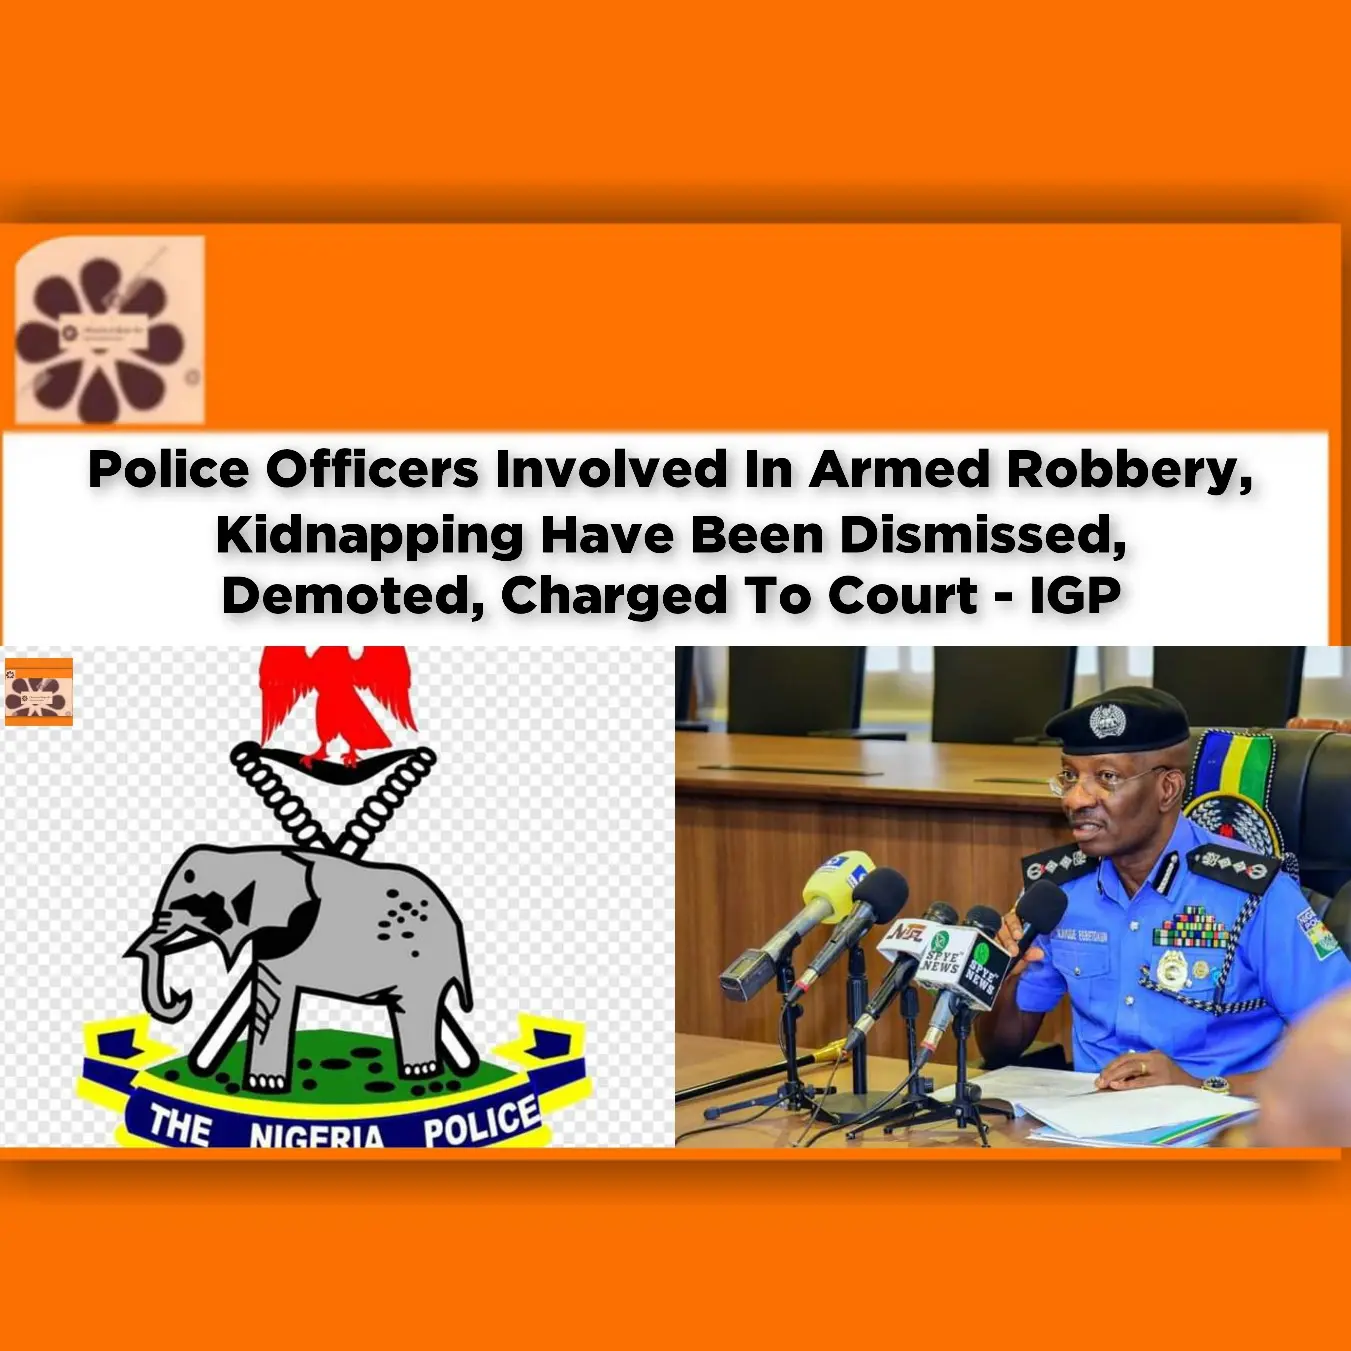 Police Officers Involved In Armed Robbery, Kidnapping Have Been Dismissed, Demoted, Charged To Court - IGP ~ OsazuwaAkonedo #Abubakar